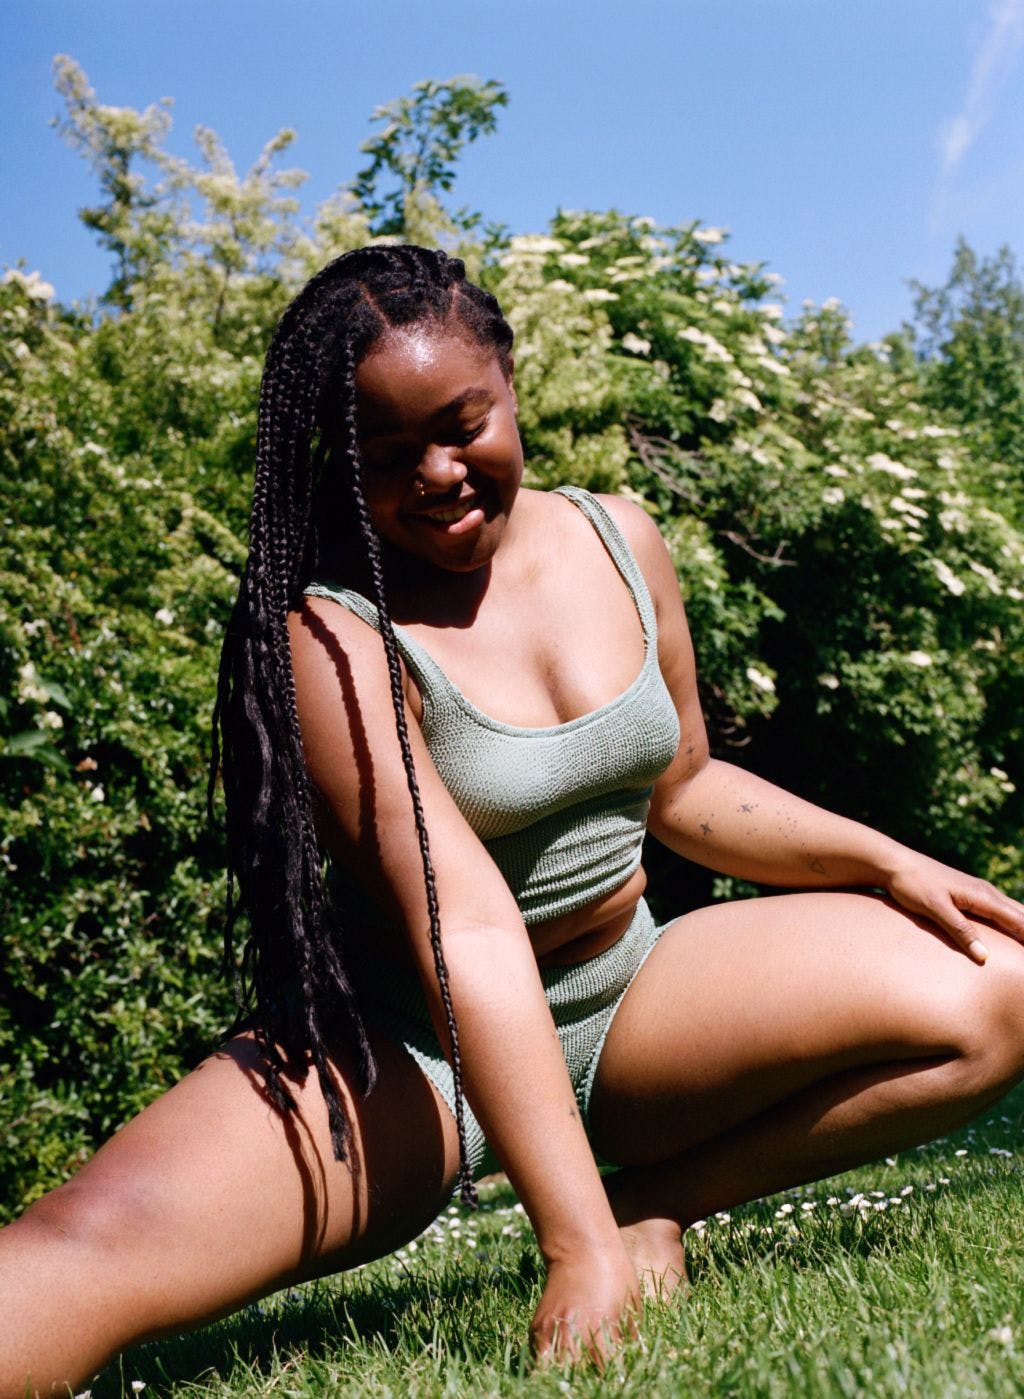 Esther on grass in green swimsuit top and shorts 